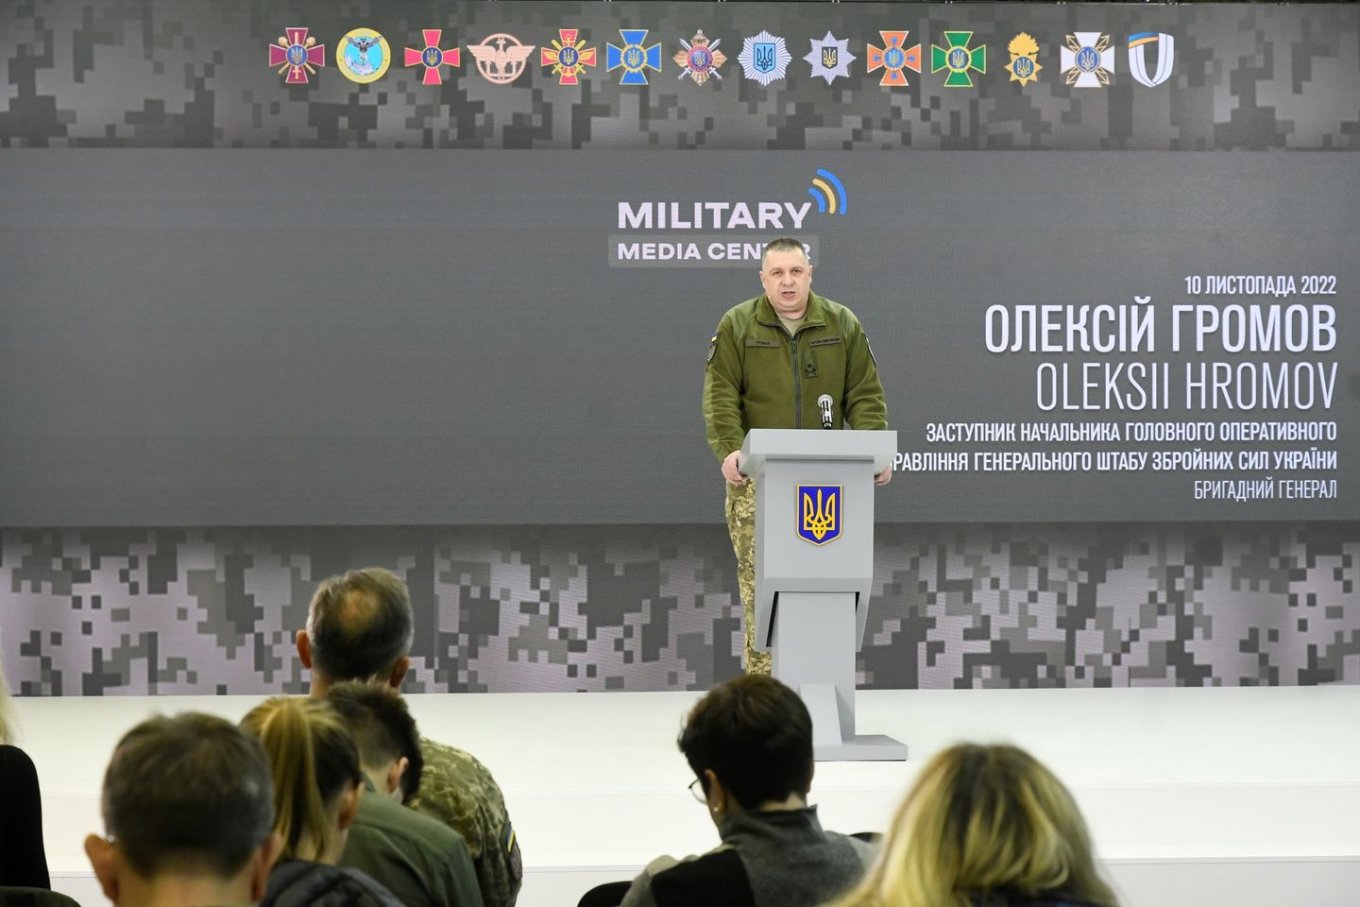 Brigadier General Oleksiy Hromov, Deputy Chief of the Main Operational Department of the General Staff of the Armed Forces of Ukraine, Ukrainian Forces' C-in-C States Ukraine's Troops Keep Conducting Offensive Operations While General Staff Says There Is No ‘Green Corridor’ to Withdraw russia’s Troops From Kherson, Defense Express